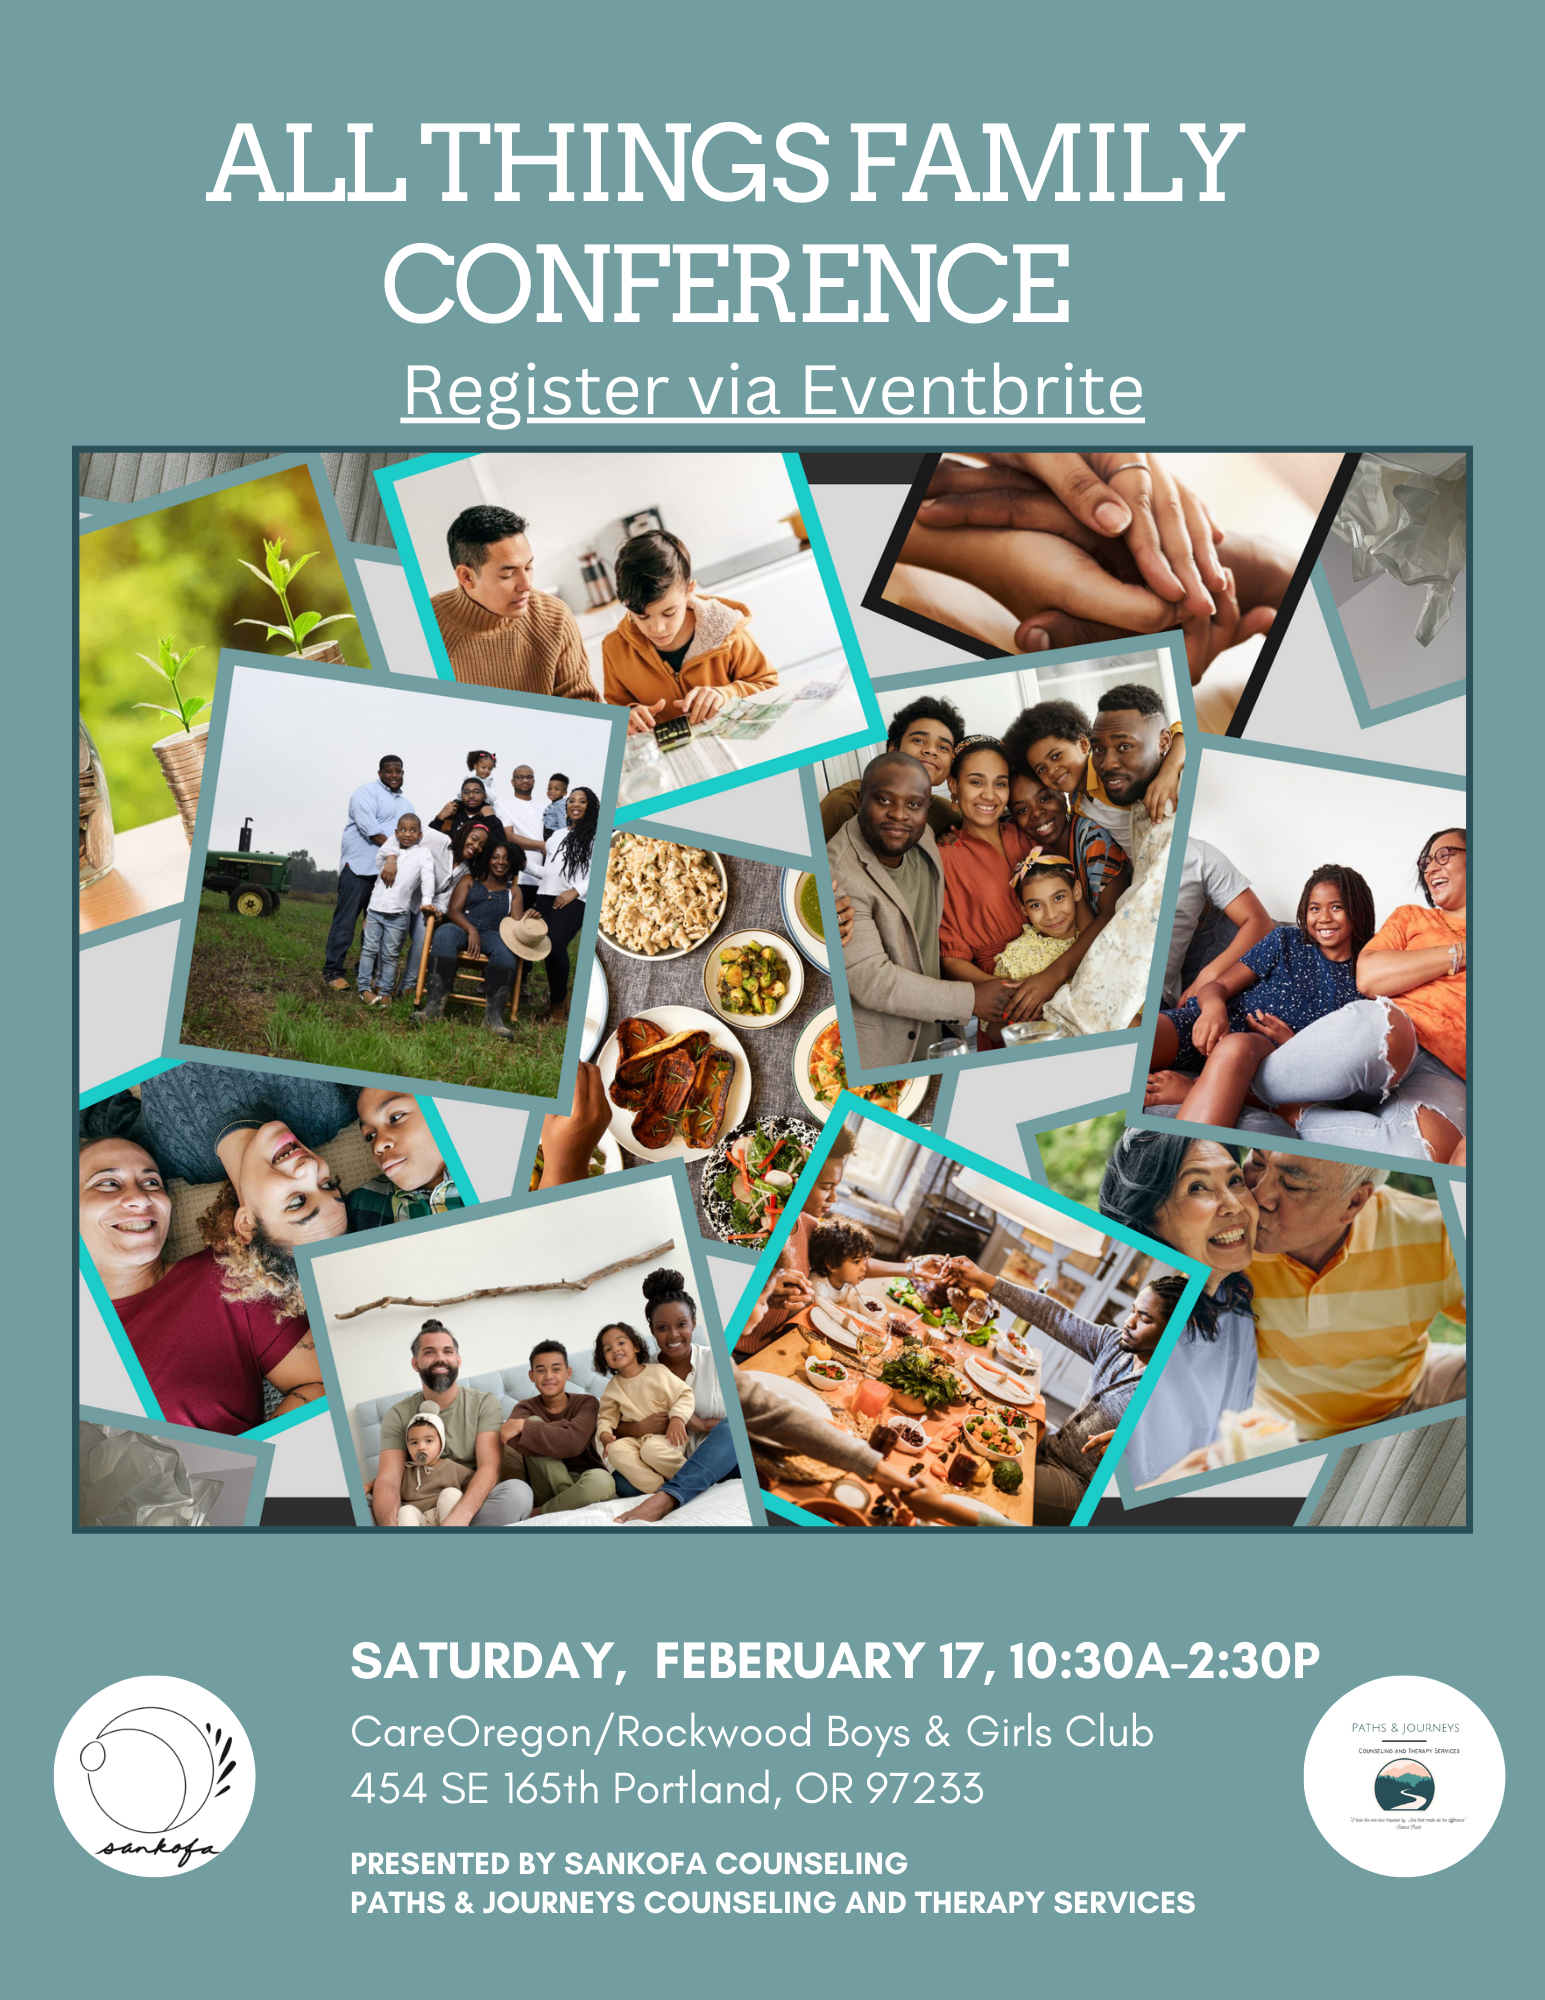 All Things Family Conference flyer